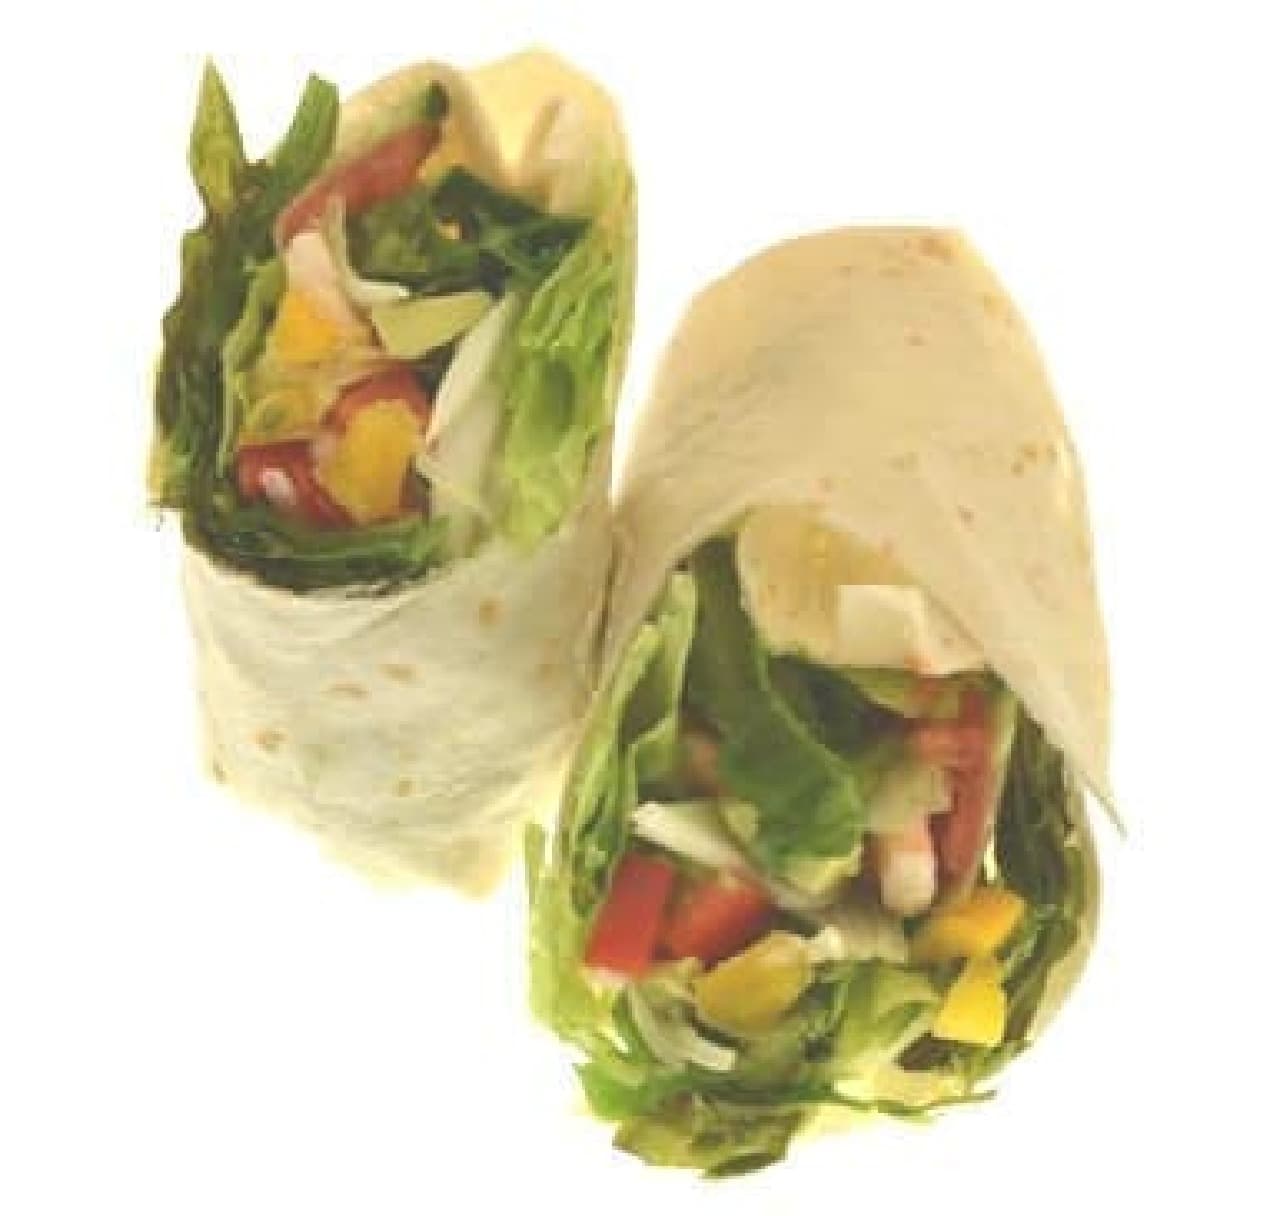 "Wrap sandwich" with salad wrapped in tortillas